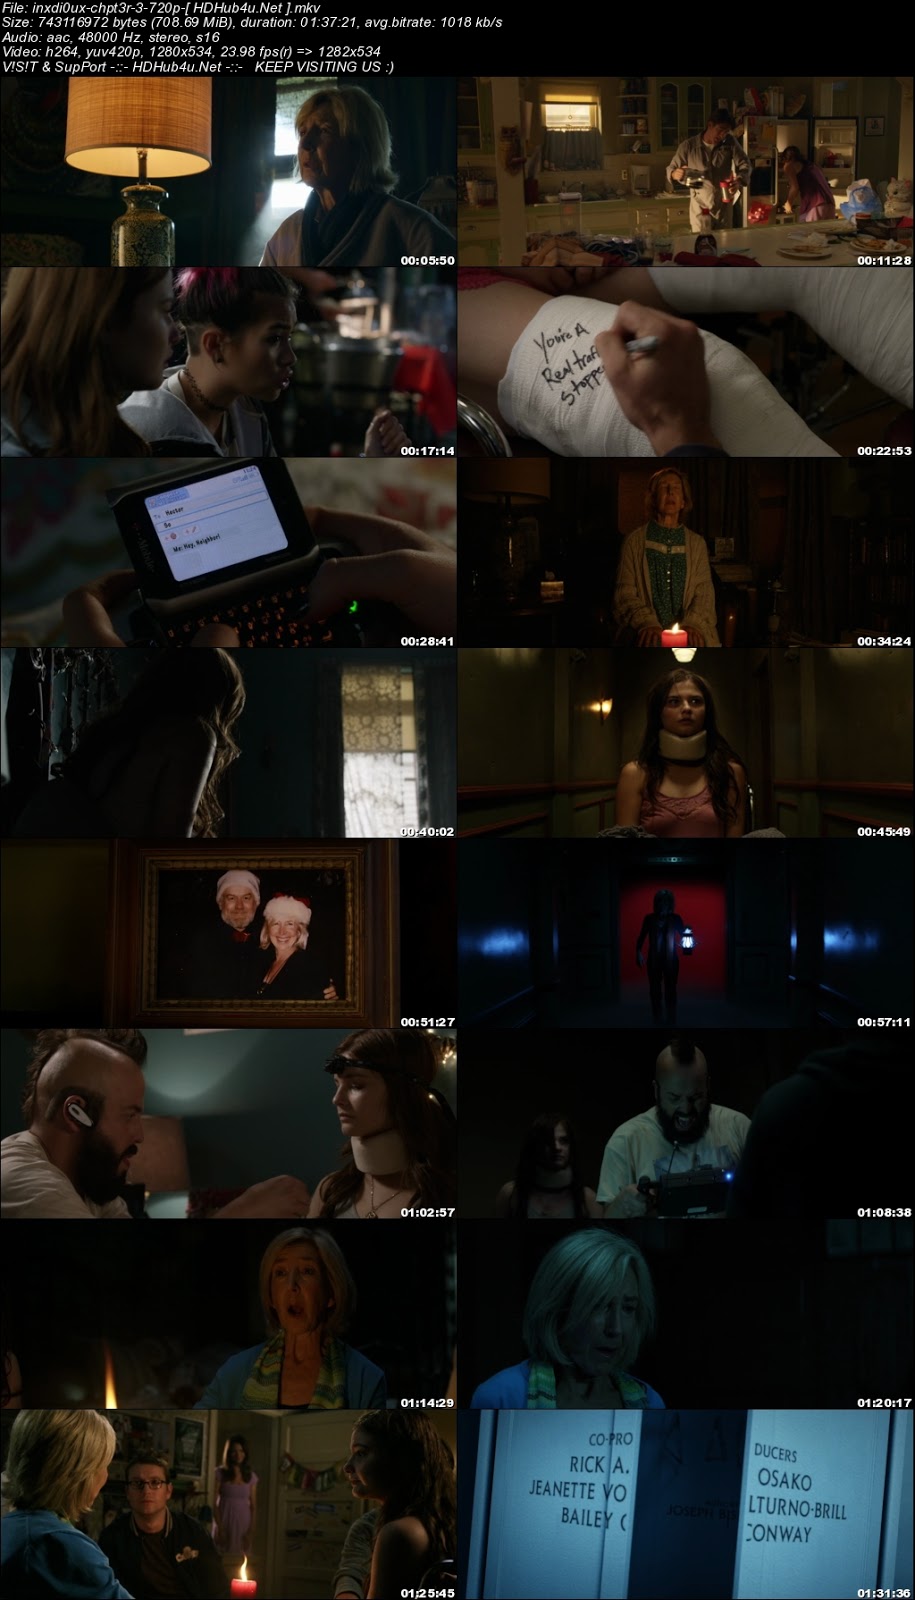 Insidious Chapter 3 2015 English Movie 720p BluRay Esubs 700MB Download